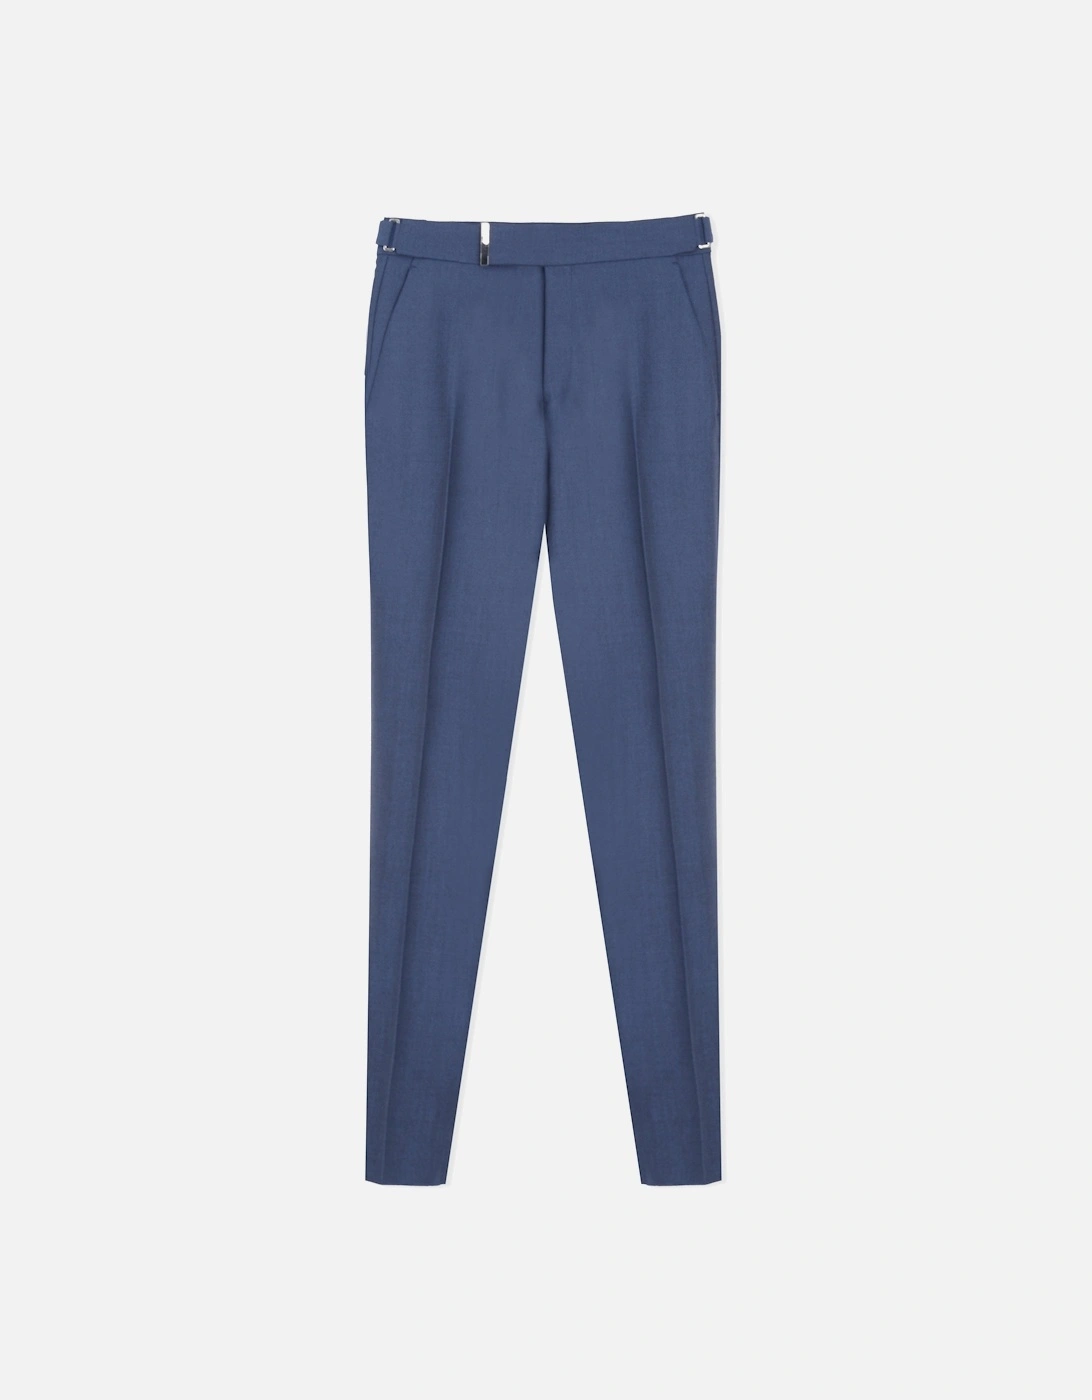 Mohair Atticus Trousers Navy, 7 of 6